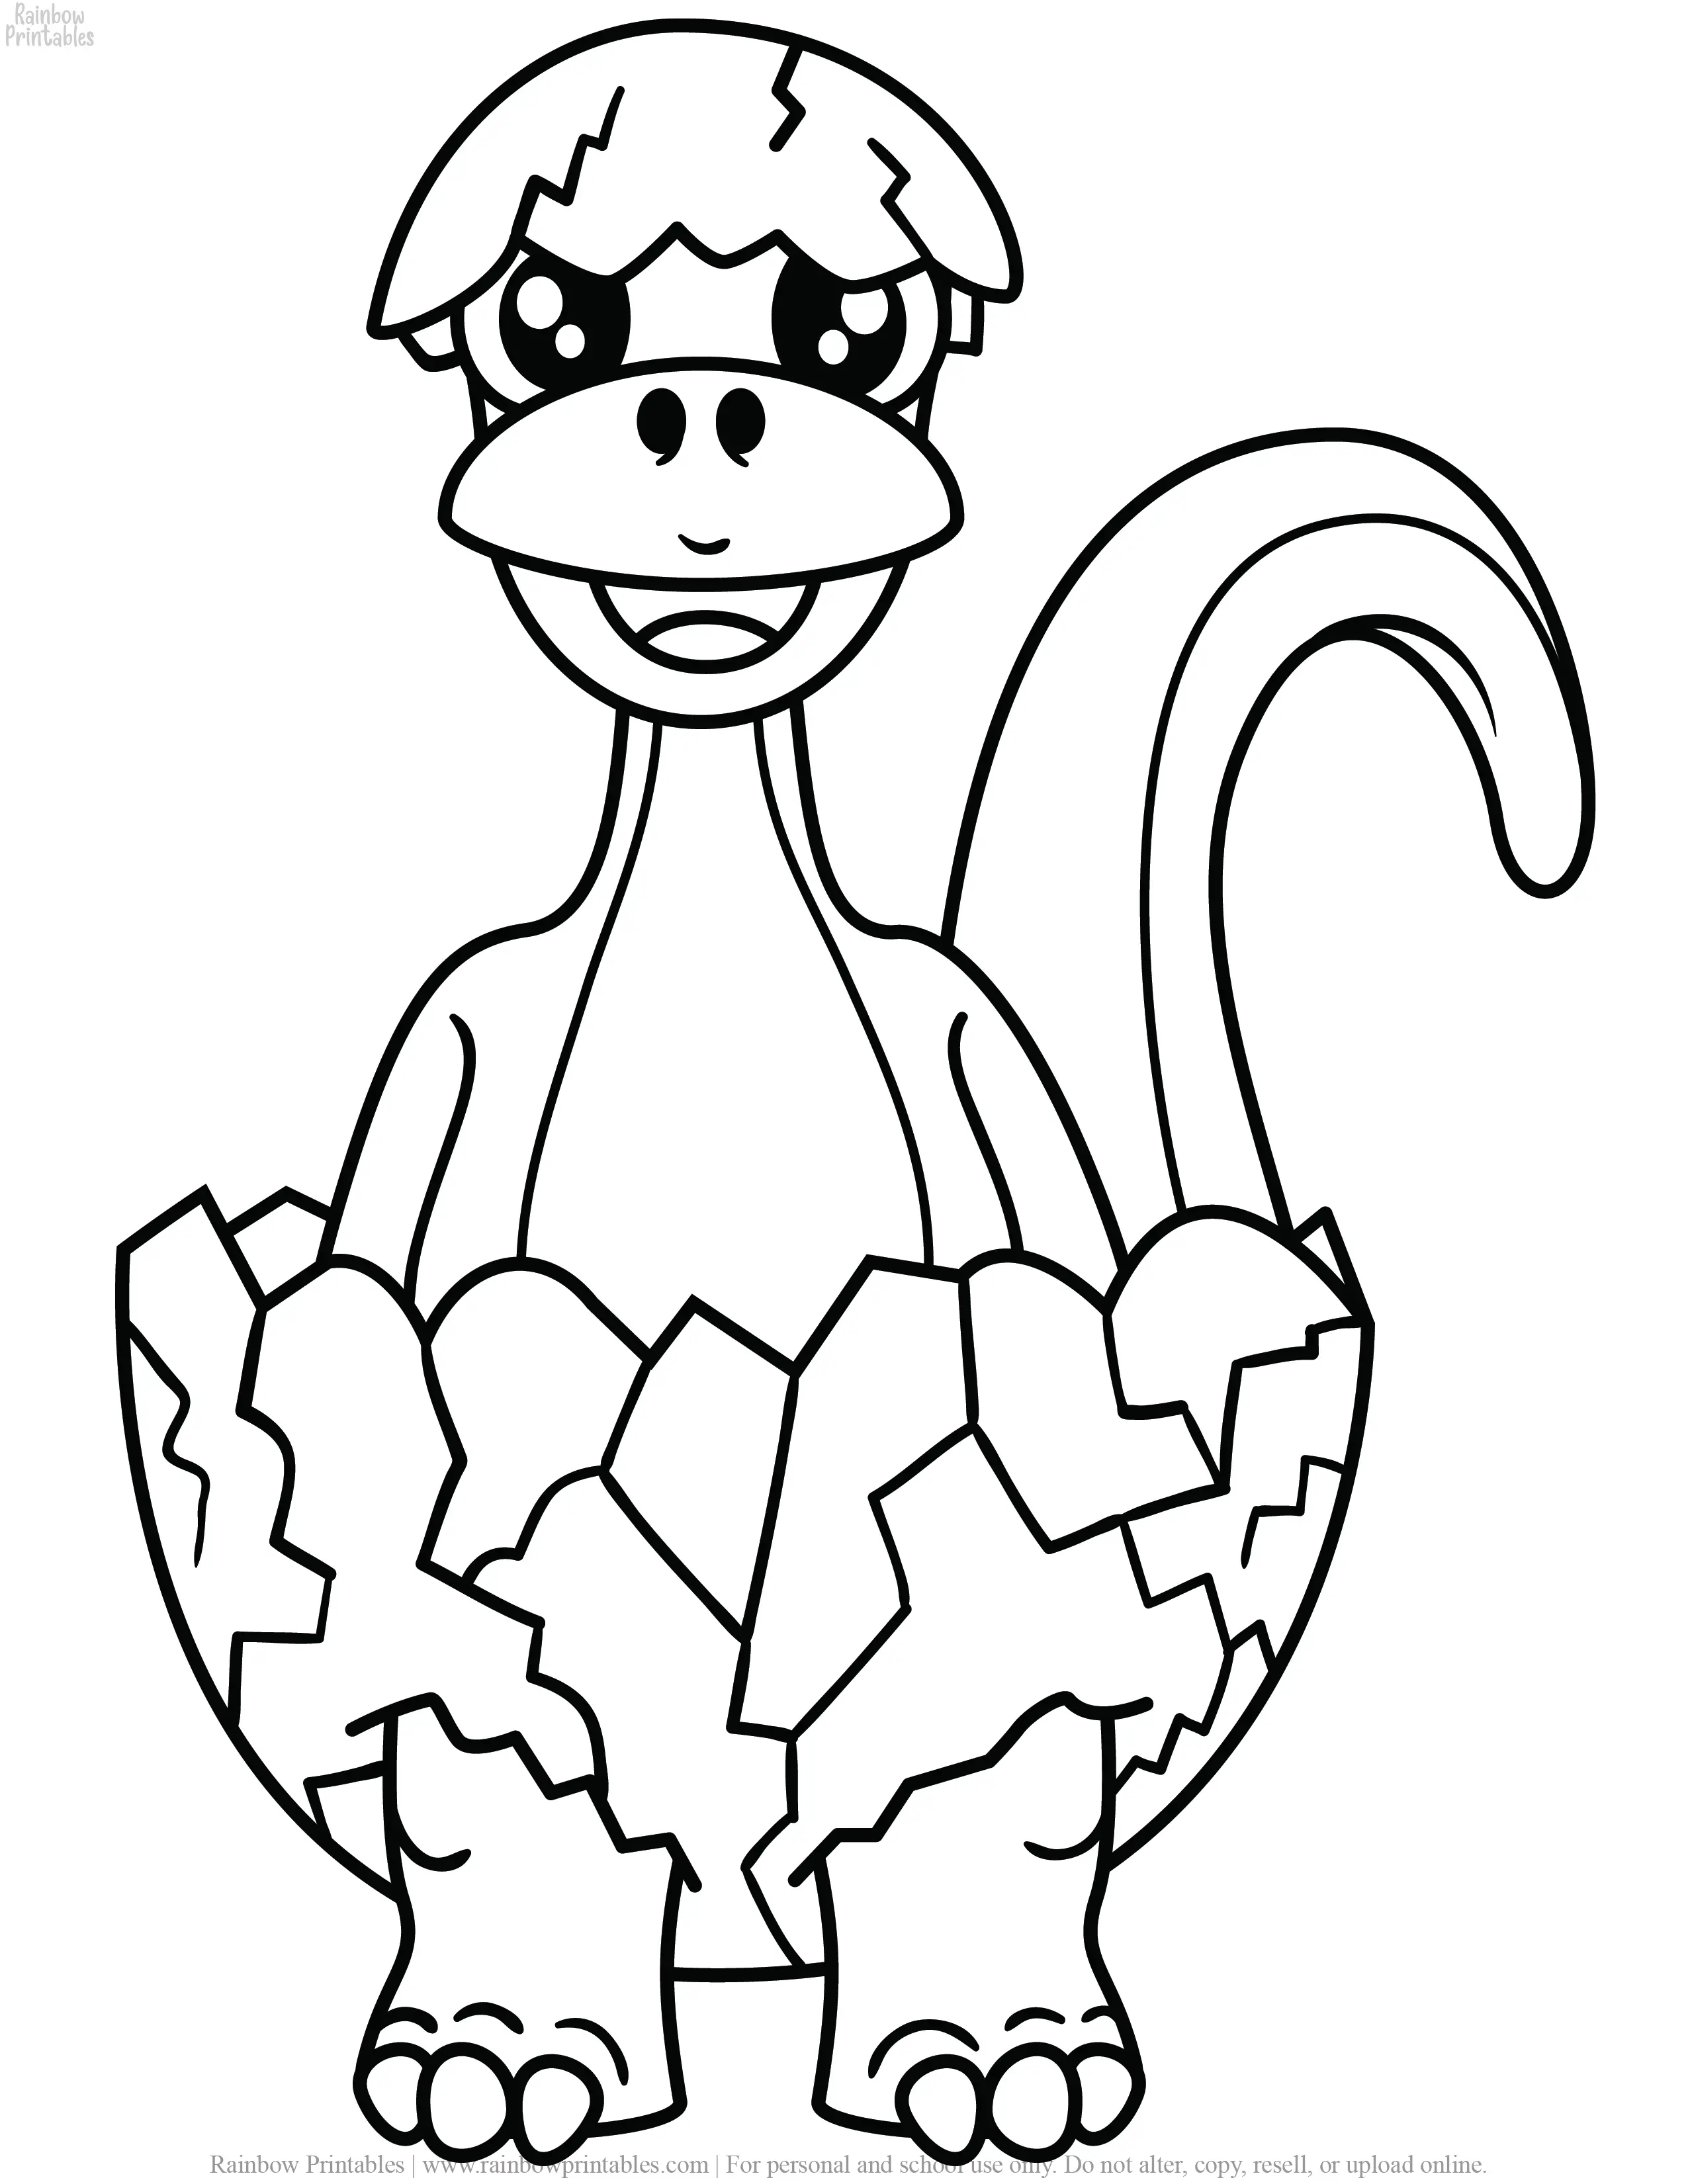 FREE DINOSAUR COLORING PAGES ACTIVITY FOR KIDS AND BOYS DINO DRAGON PRINTABLE